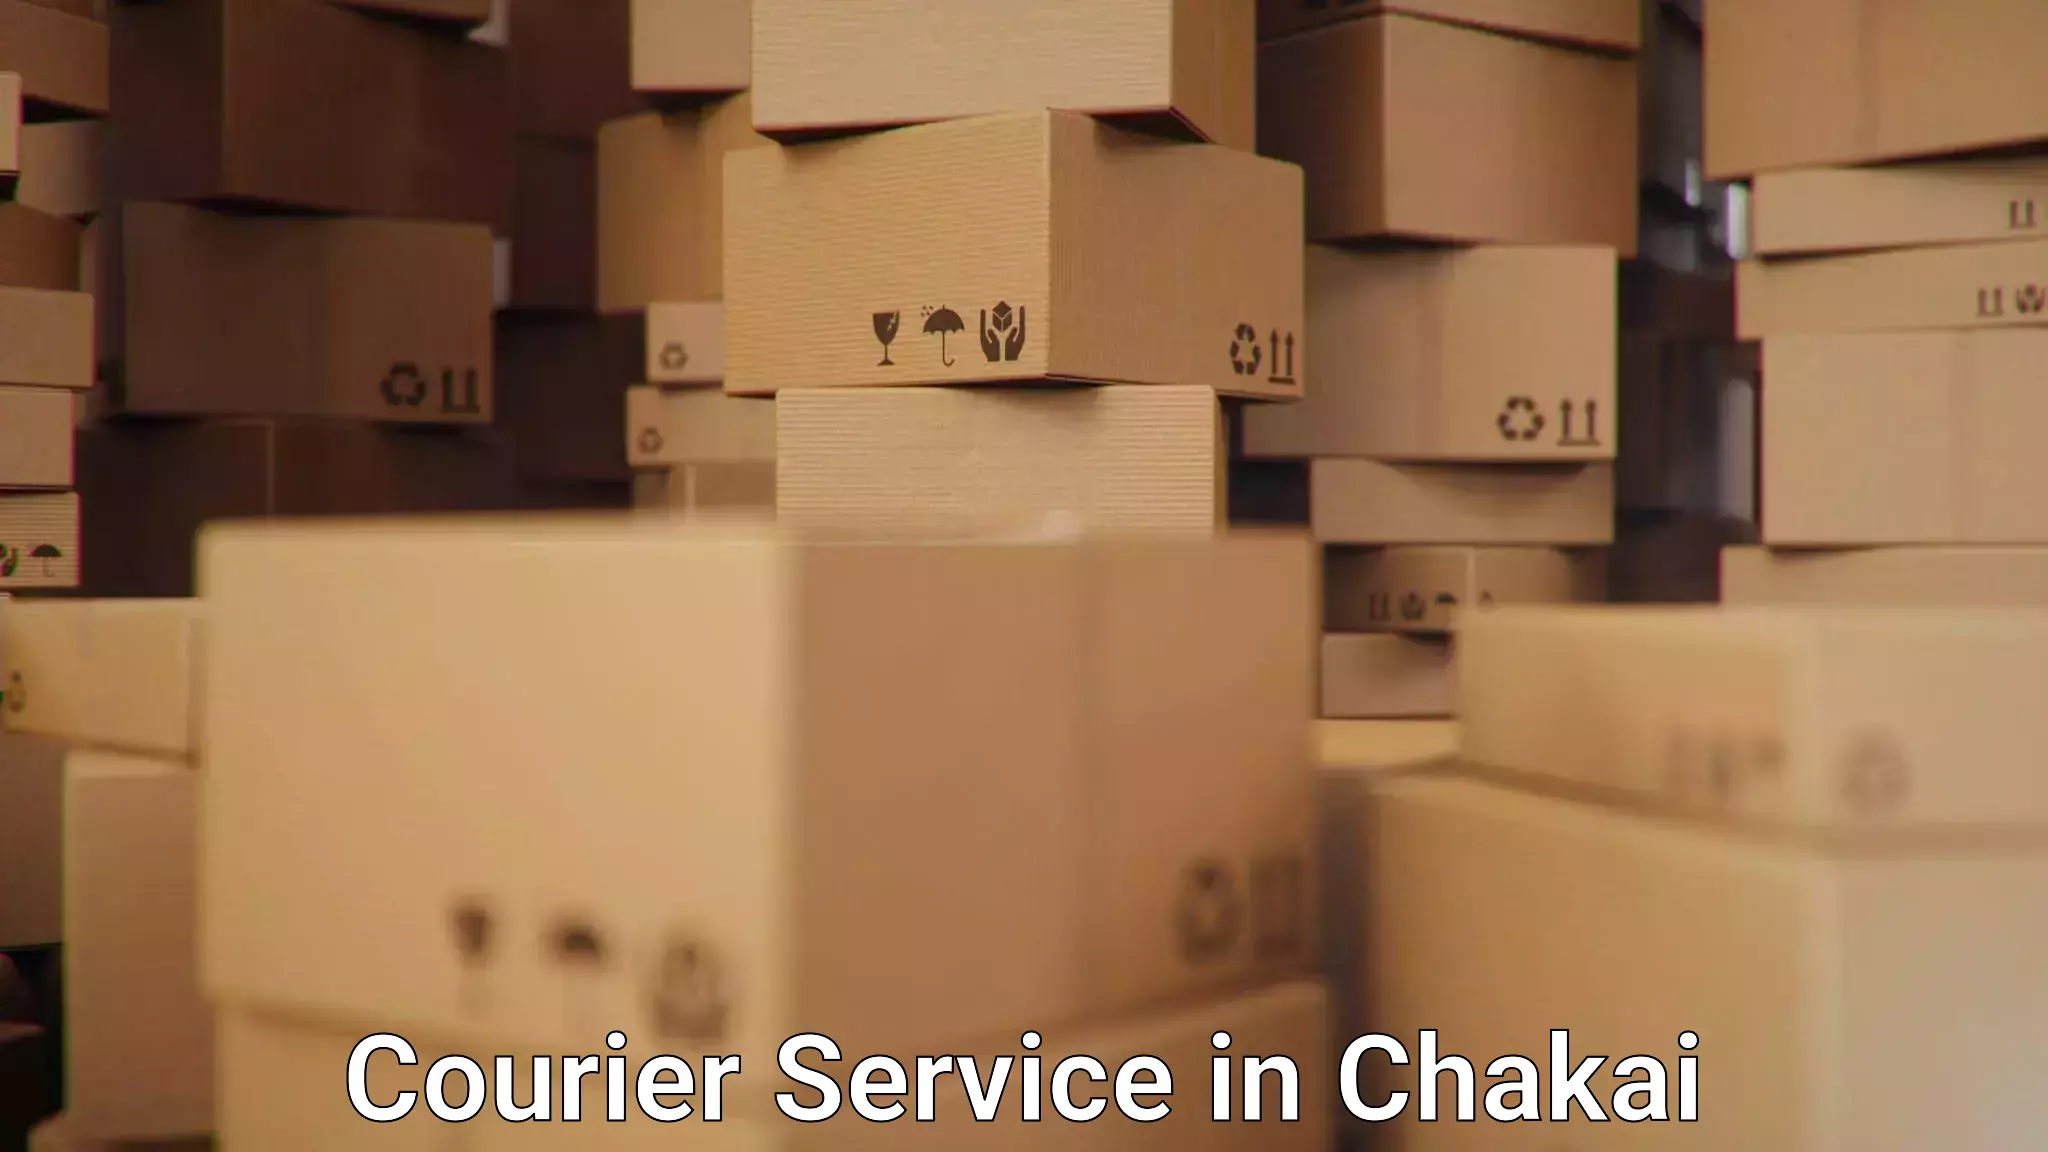 Fast delivery service in Chakai